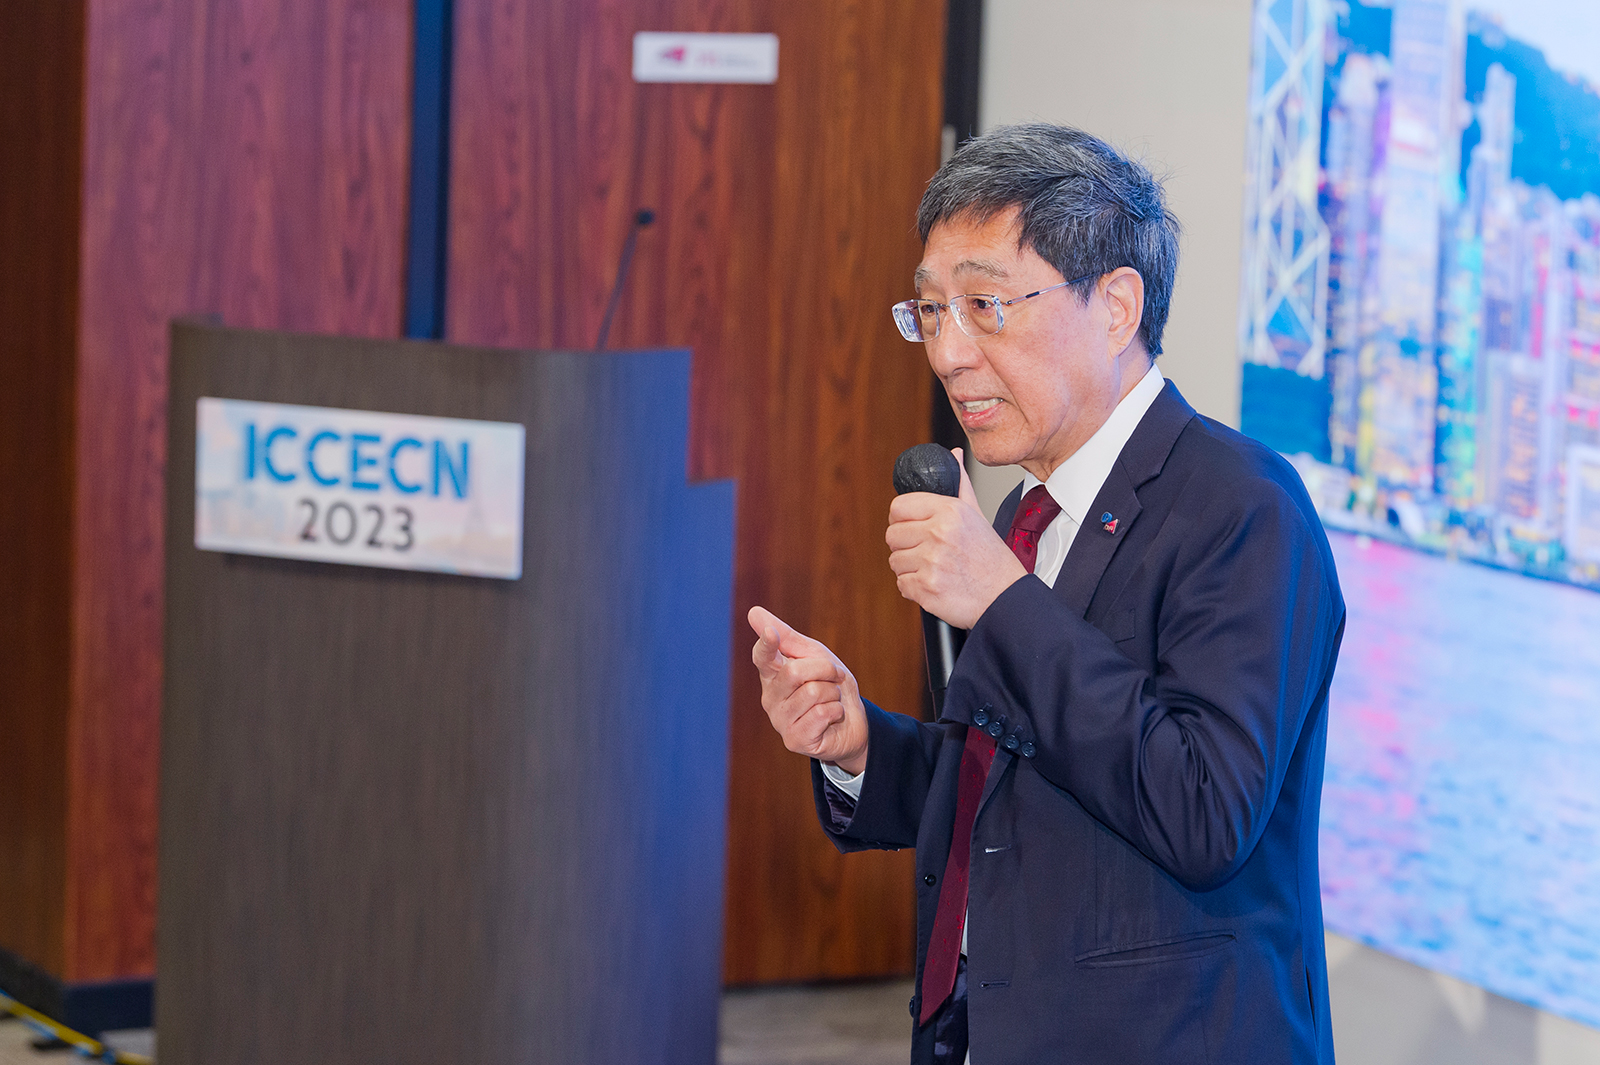 In his welcoming speech, President Kuo said that CityU is actively involved in conducting innovative research and nurturing talent to facilitate the transformation to a carbon-neutral economy and promote research and development in technologies that will drive net-zero carbon innovations.